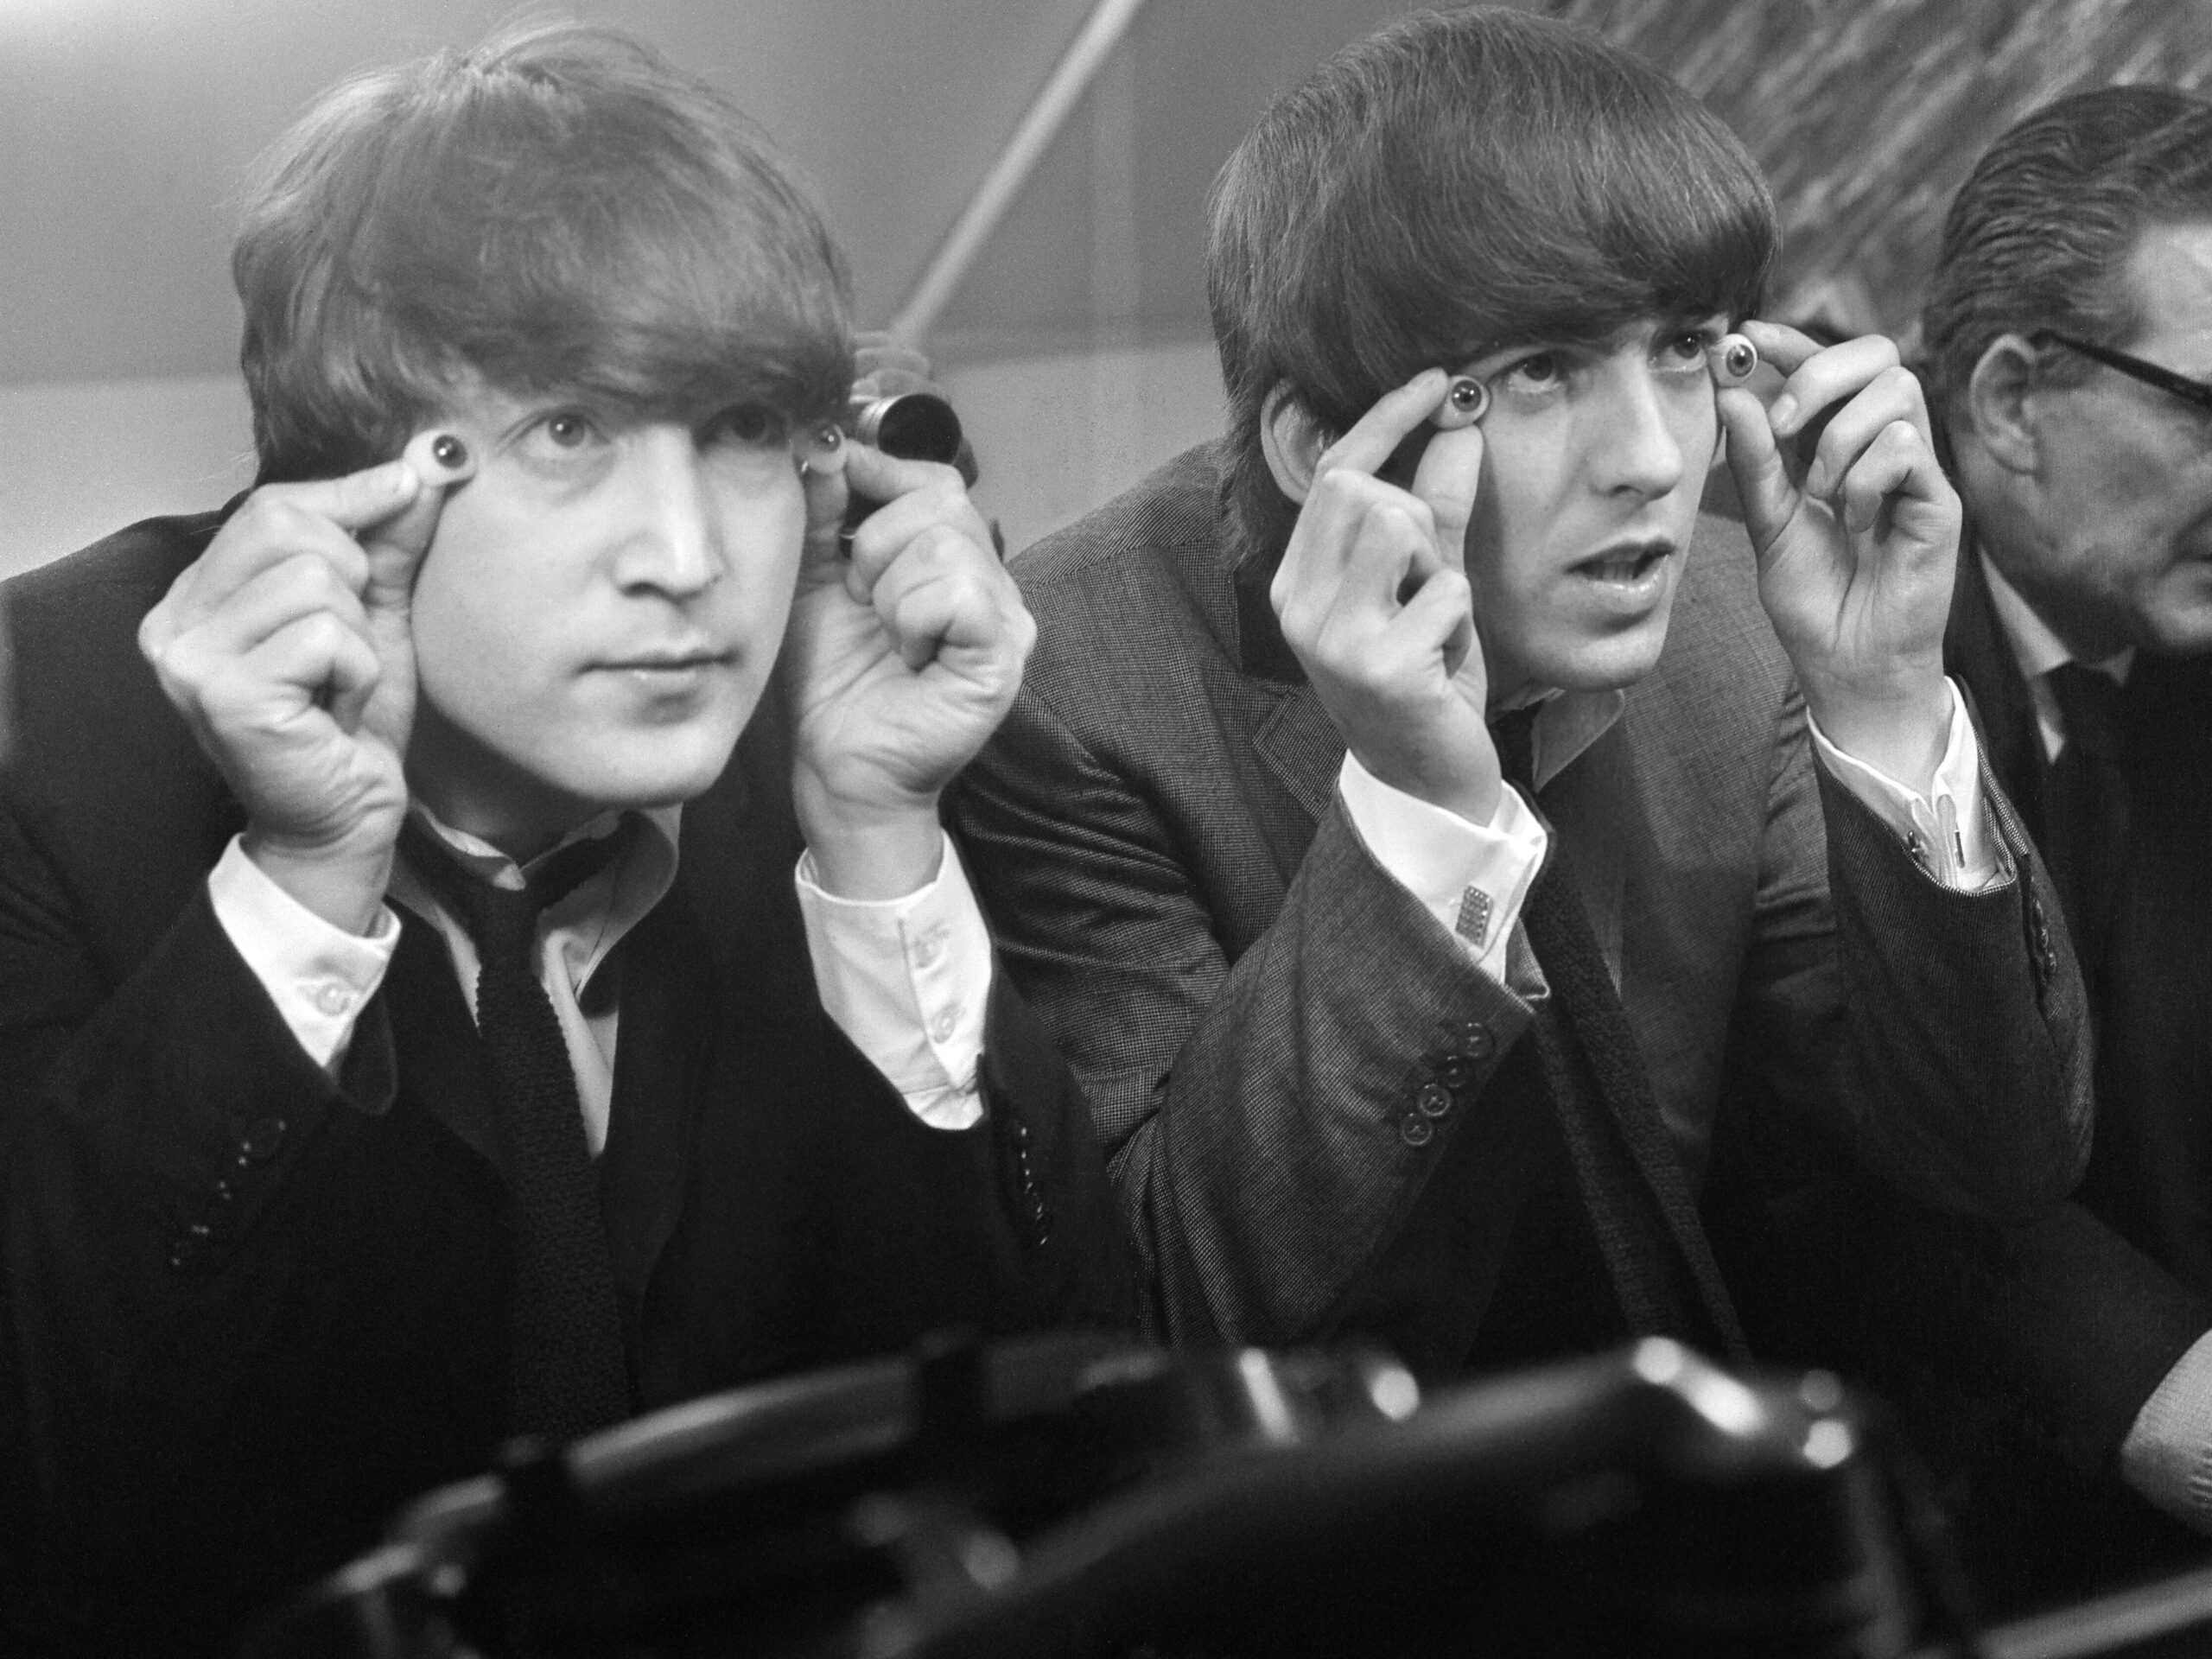 John Lennon and George Harrison with glass eyes when the Beatles&#39; details were being taken for their Madame Tussauds waxworks during the making of &#34;A Hard Day&#39;s Night&#34;, Twickenham Film Studios, 12 March 1964.